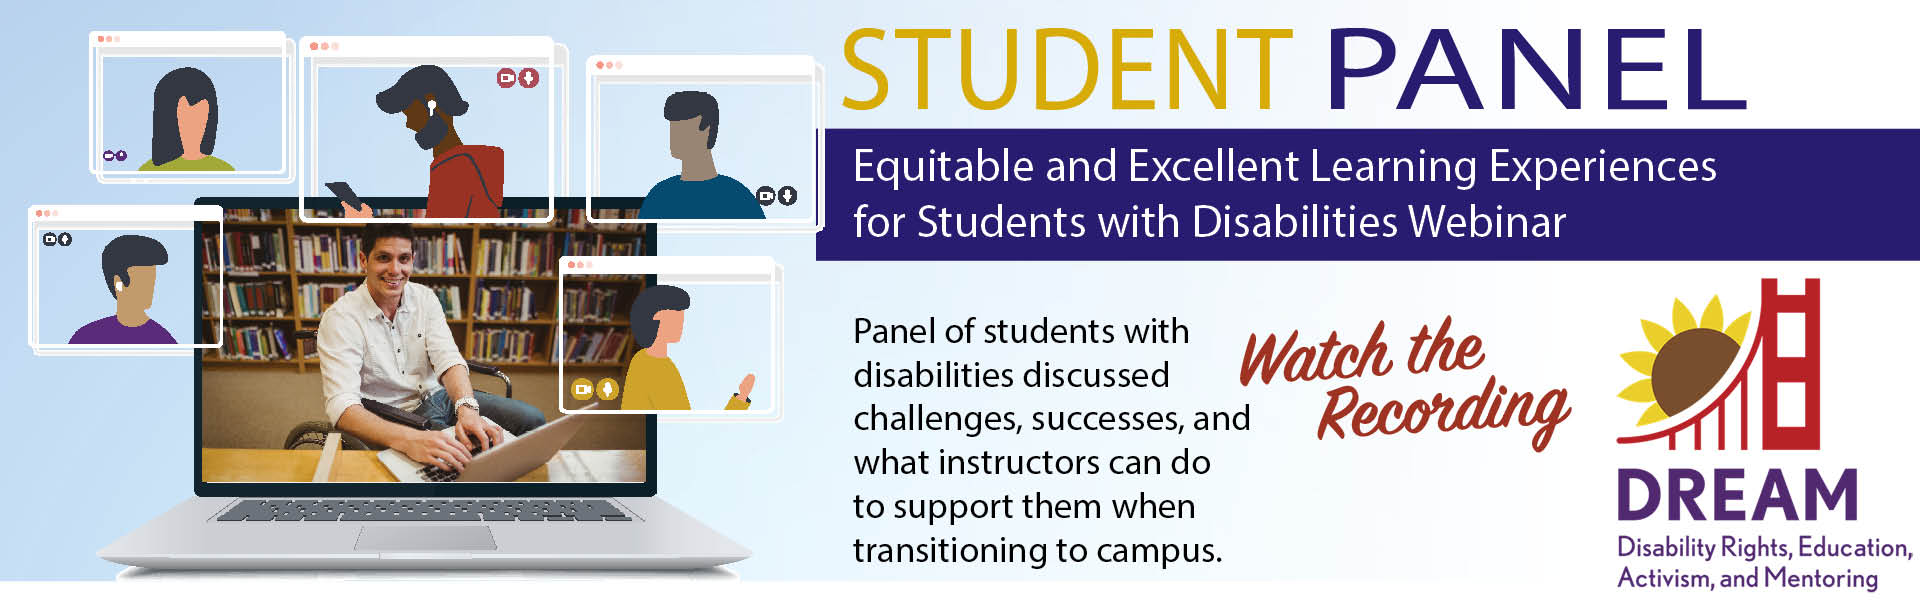 DREAM Student Panel CEETL Ad for previously recorded Webinar